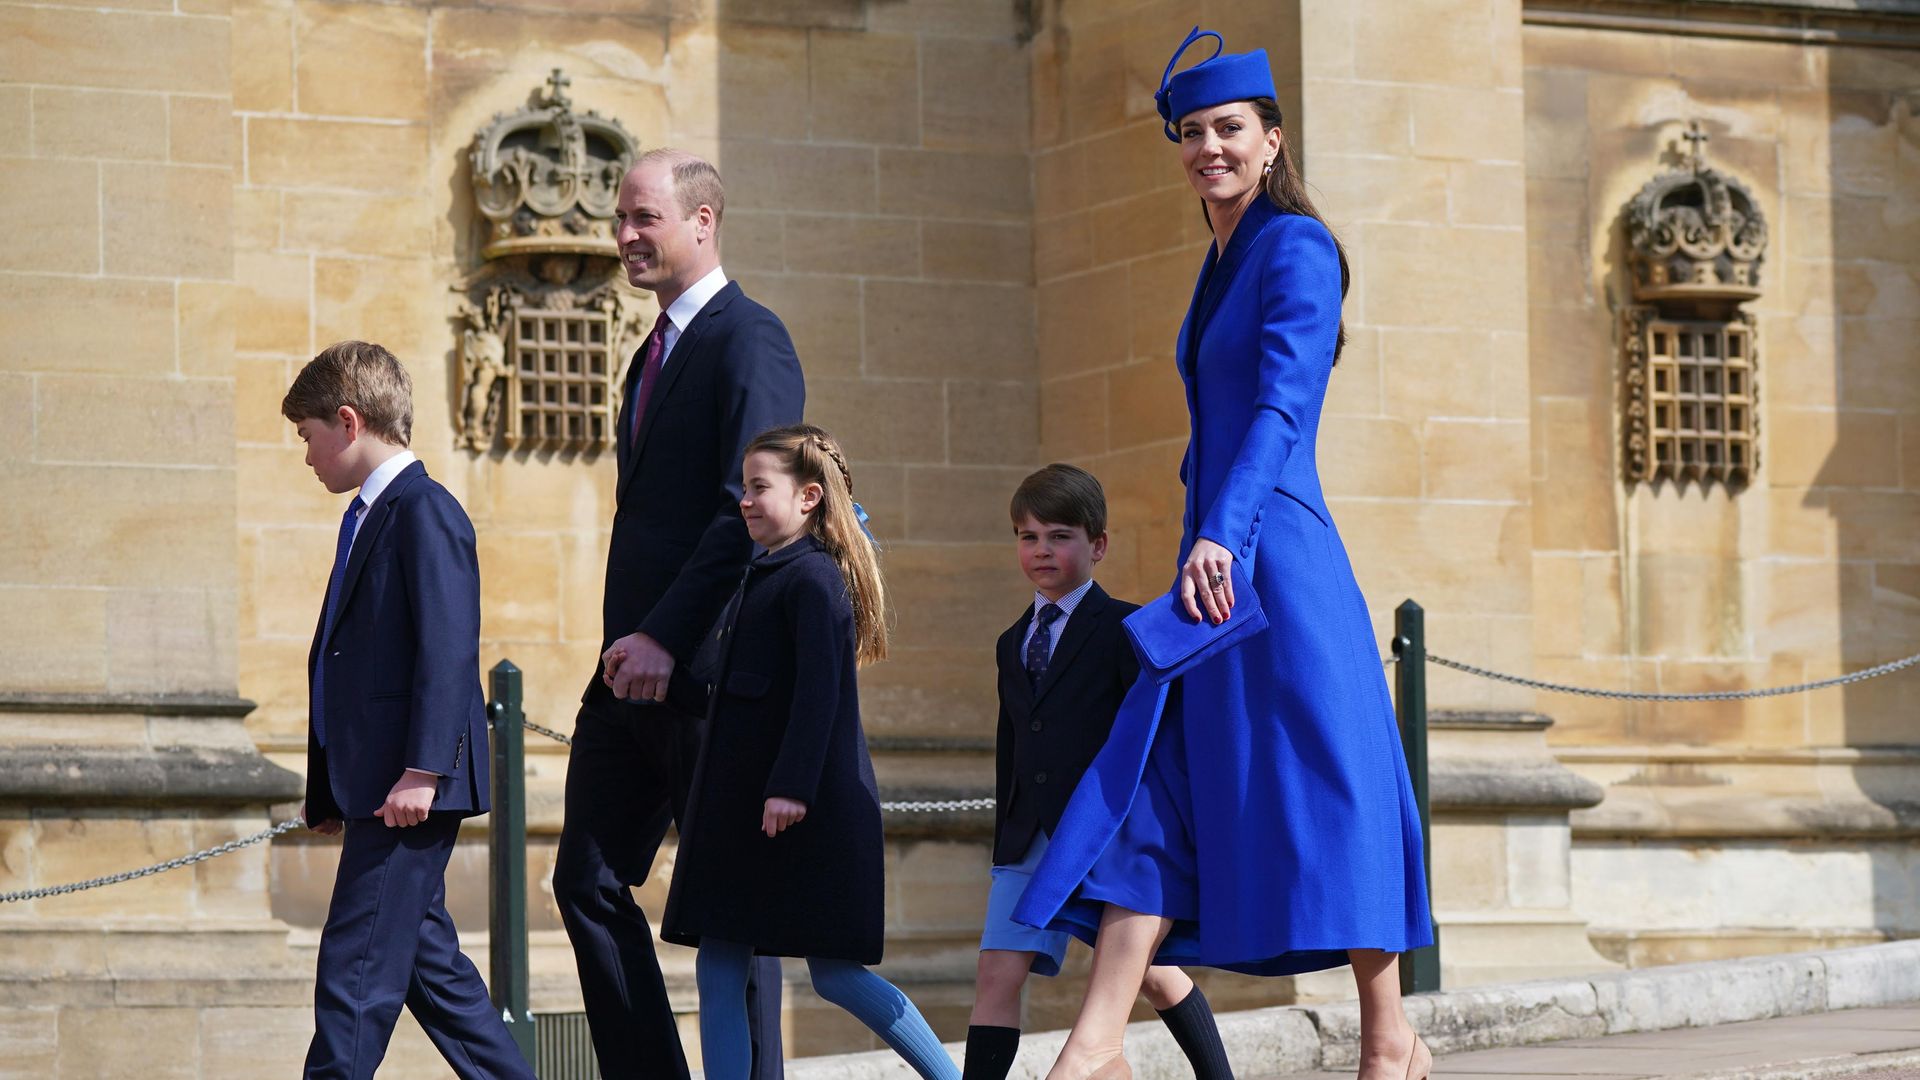 The Prince and Princess of Wales attend Easter Sunday church service with George, Charlotte and Louis